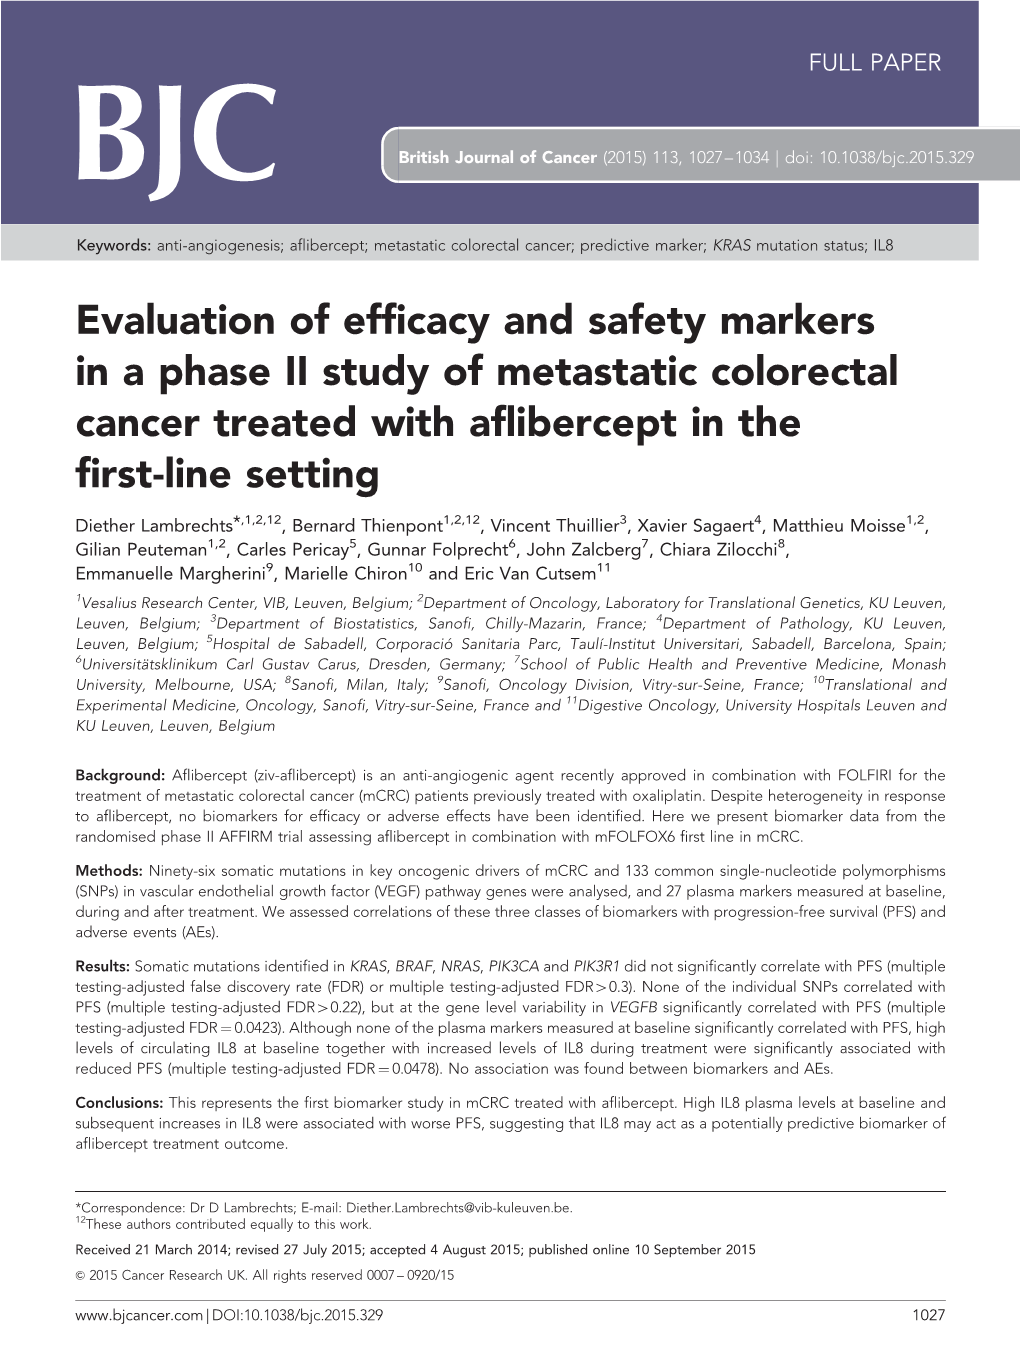 Evaluation of Efficacy and Safety Markers in a Phase II Study of Metastatic Colorectal Cancer Treated with Aflibercept in the First-Line Setting